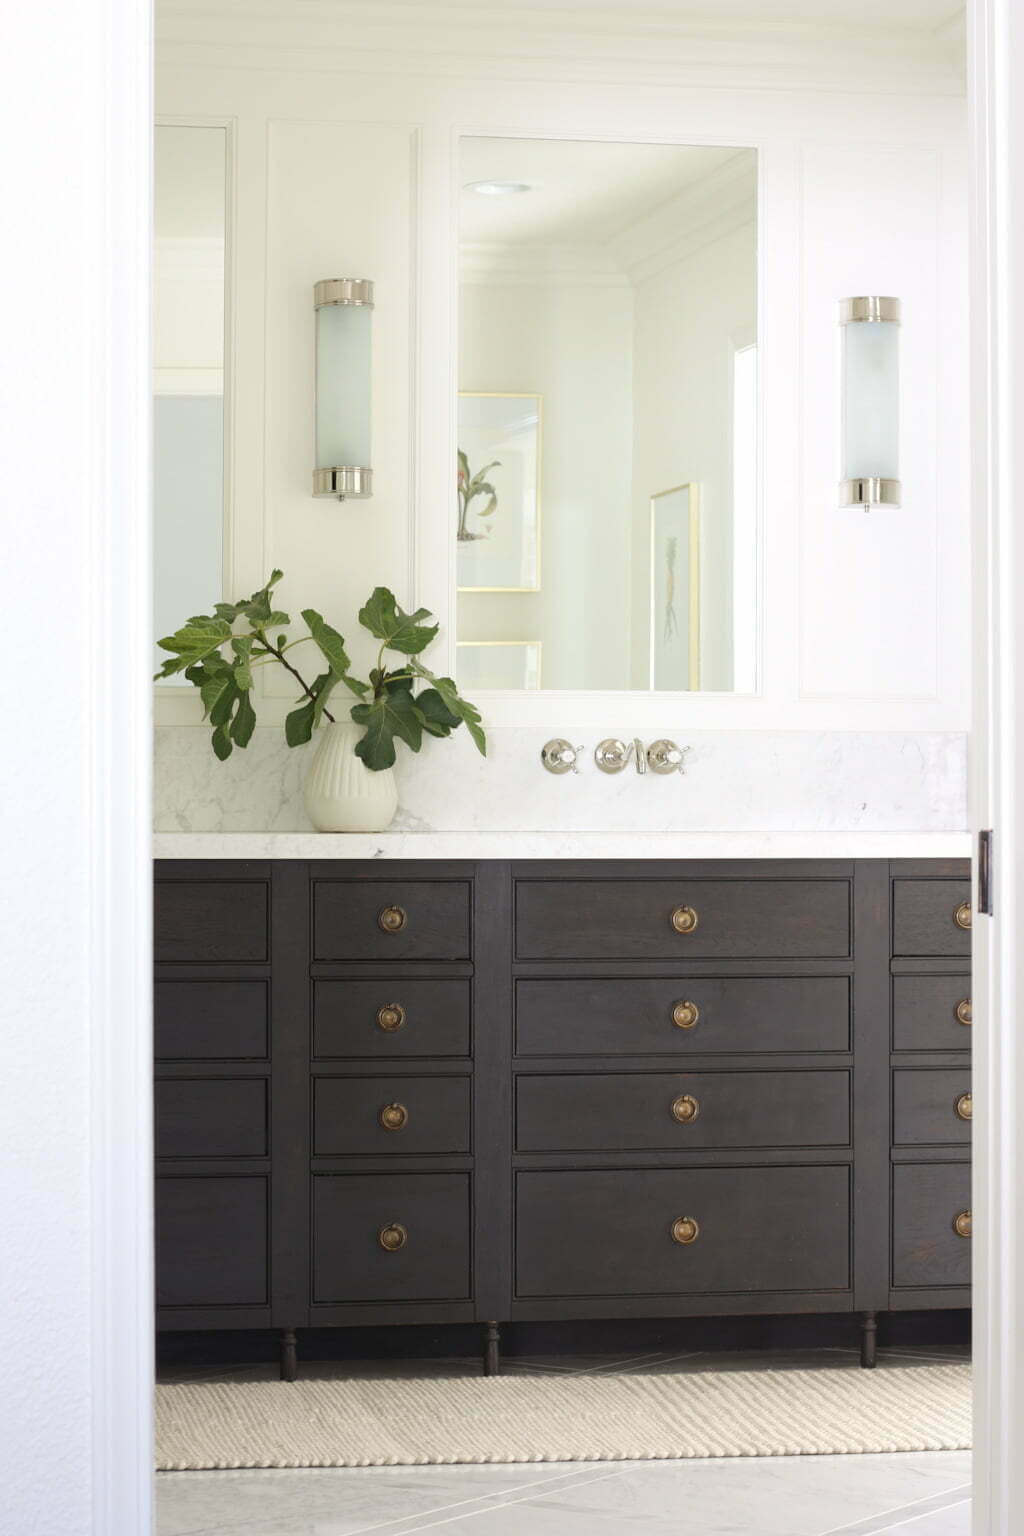 Traditional bathroom with a wooden double vanity, marble top and bathroom vanity lights chrome.